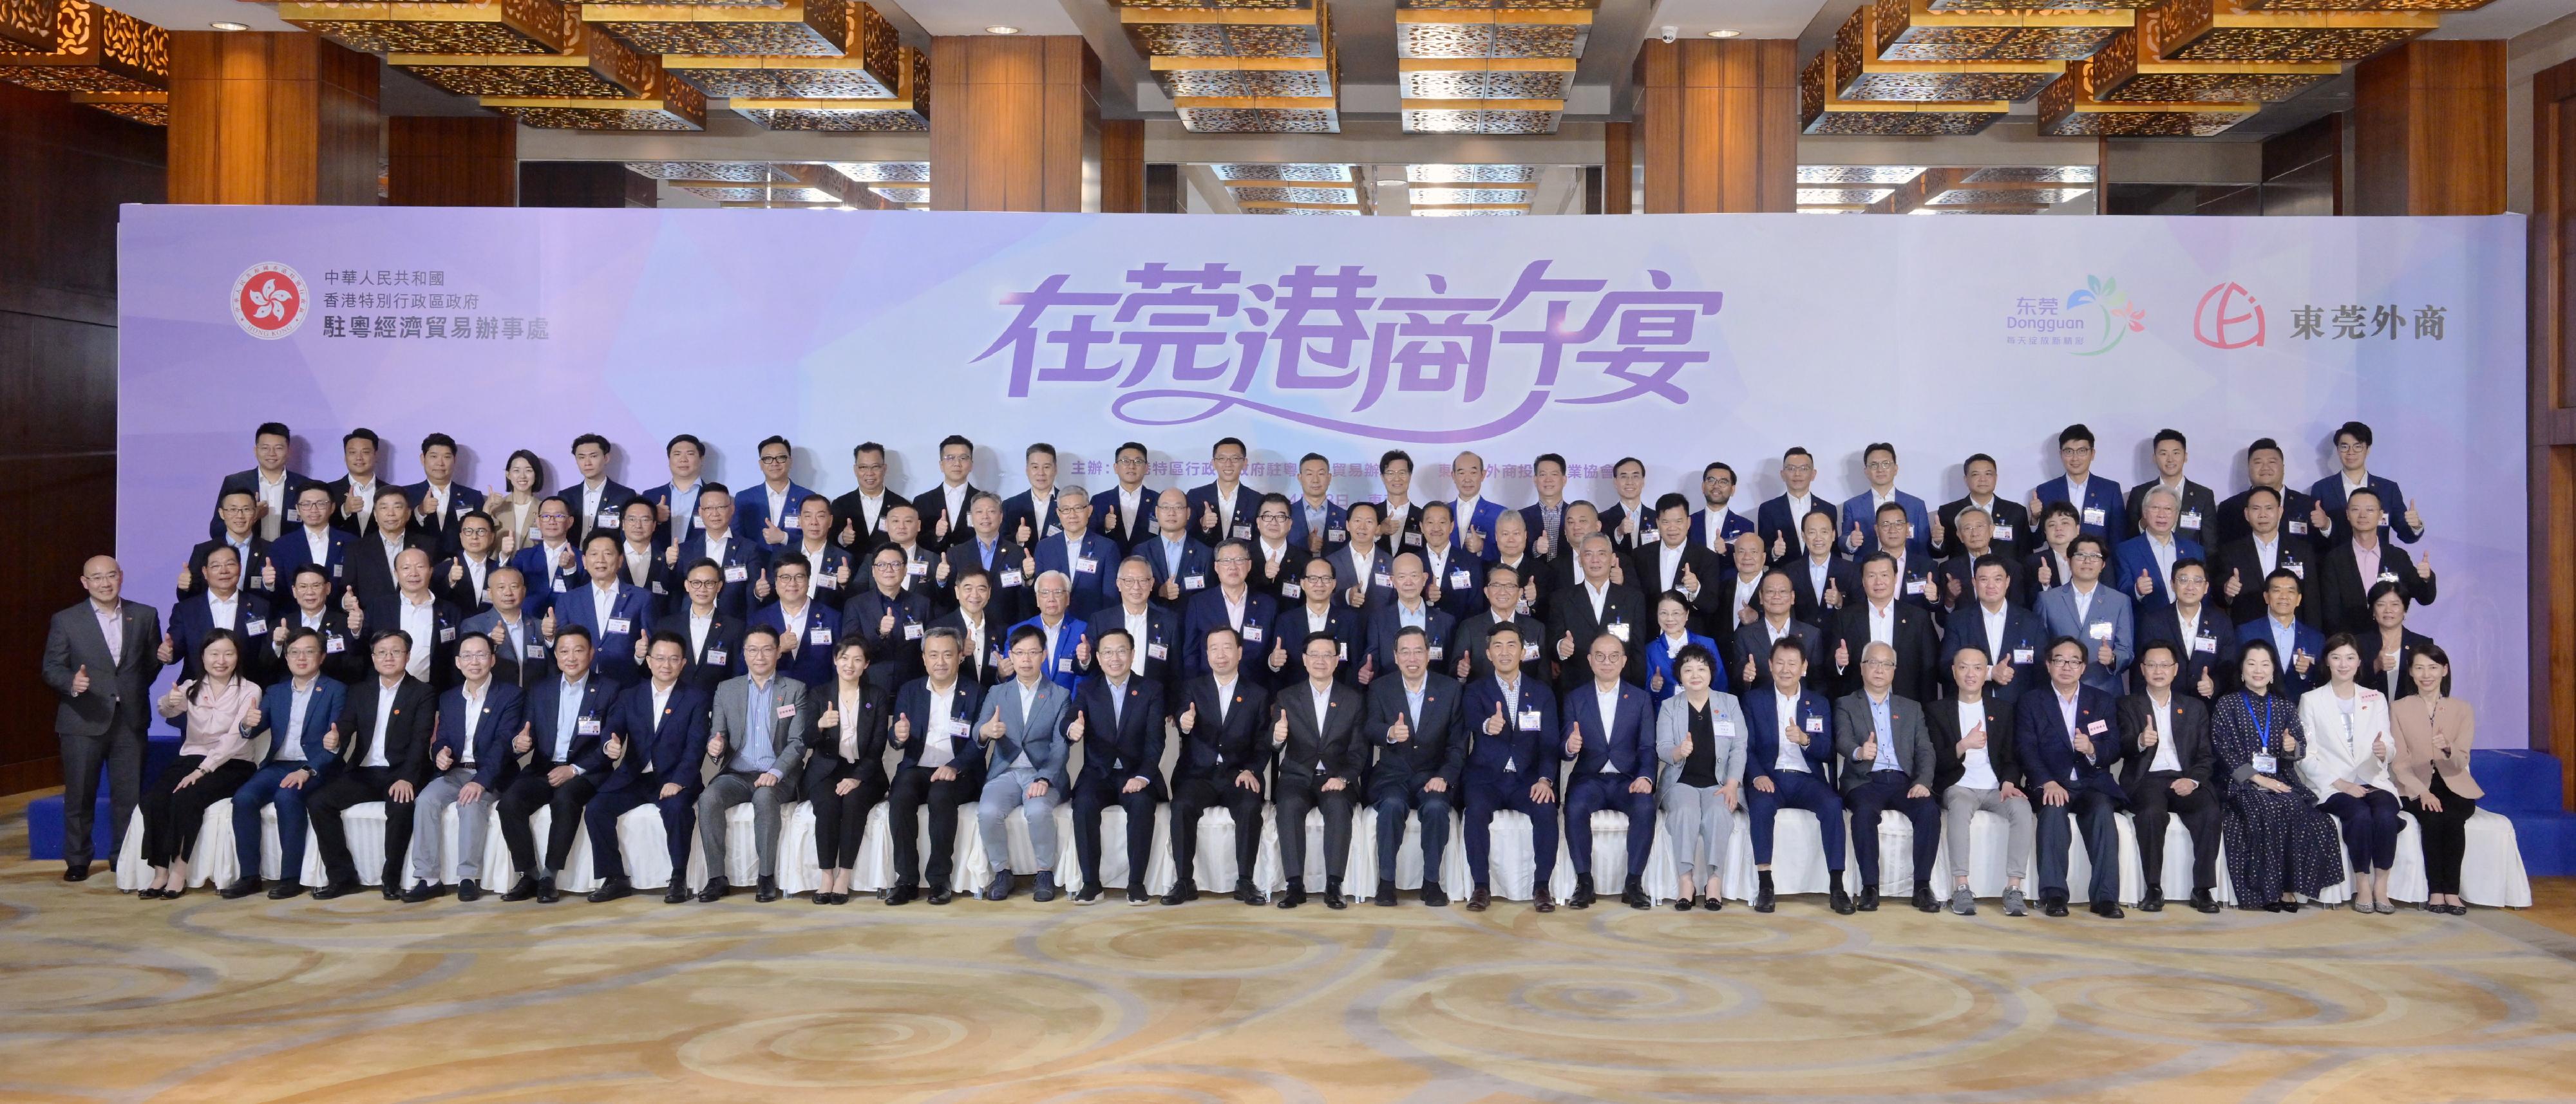 The Chief Executive, Mr John Lee, led a delegation of the Hong Kong Special Administrative Region Government and the Legislative Council (LegCo) to visit Guangdong-Hong Kong-Macao Greater Bay Area in Dongguan today (April 23). Photo shows (first row, from eleventh left) Deputy Director of the Liaison Office of the Central People's Government in the Hong Kong Special Administrative Region Mr He Jing; the Secretary of the CPC Dongguan Municipal Committee, Mr Xiao Yafei; Mr Lee; the President of the LegCo, Mr Andrew Leung; the President of the Dongguan Waishang Investment Enterprise Association, Mr Lian Hansen; the Secretary for Constitutional and Mainland Affairs, Mr Erick Tsang Kwok-wai; the Director General of the Hong Kong and Macao Affairs Office of the People's Government of Guangdong Province, Ms Li Huanchun; Chairman of the Sitoy Group, Mr Micheal Yeung; the Secretary for Environment and Ecology, Mr Tse Chin-wan, and other guests at the luncheon hosted by the Dongguan Waishang Investment Enterprise Association.